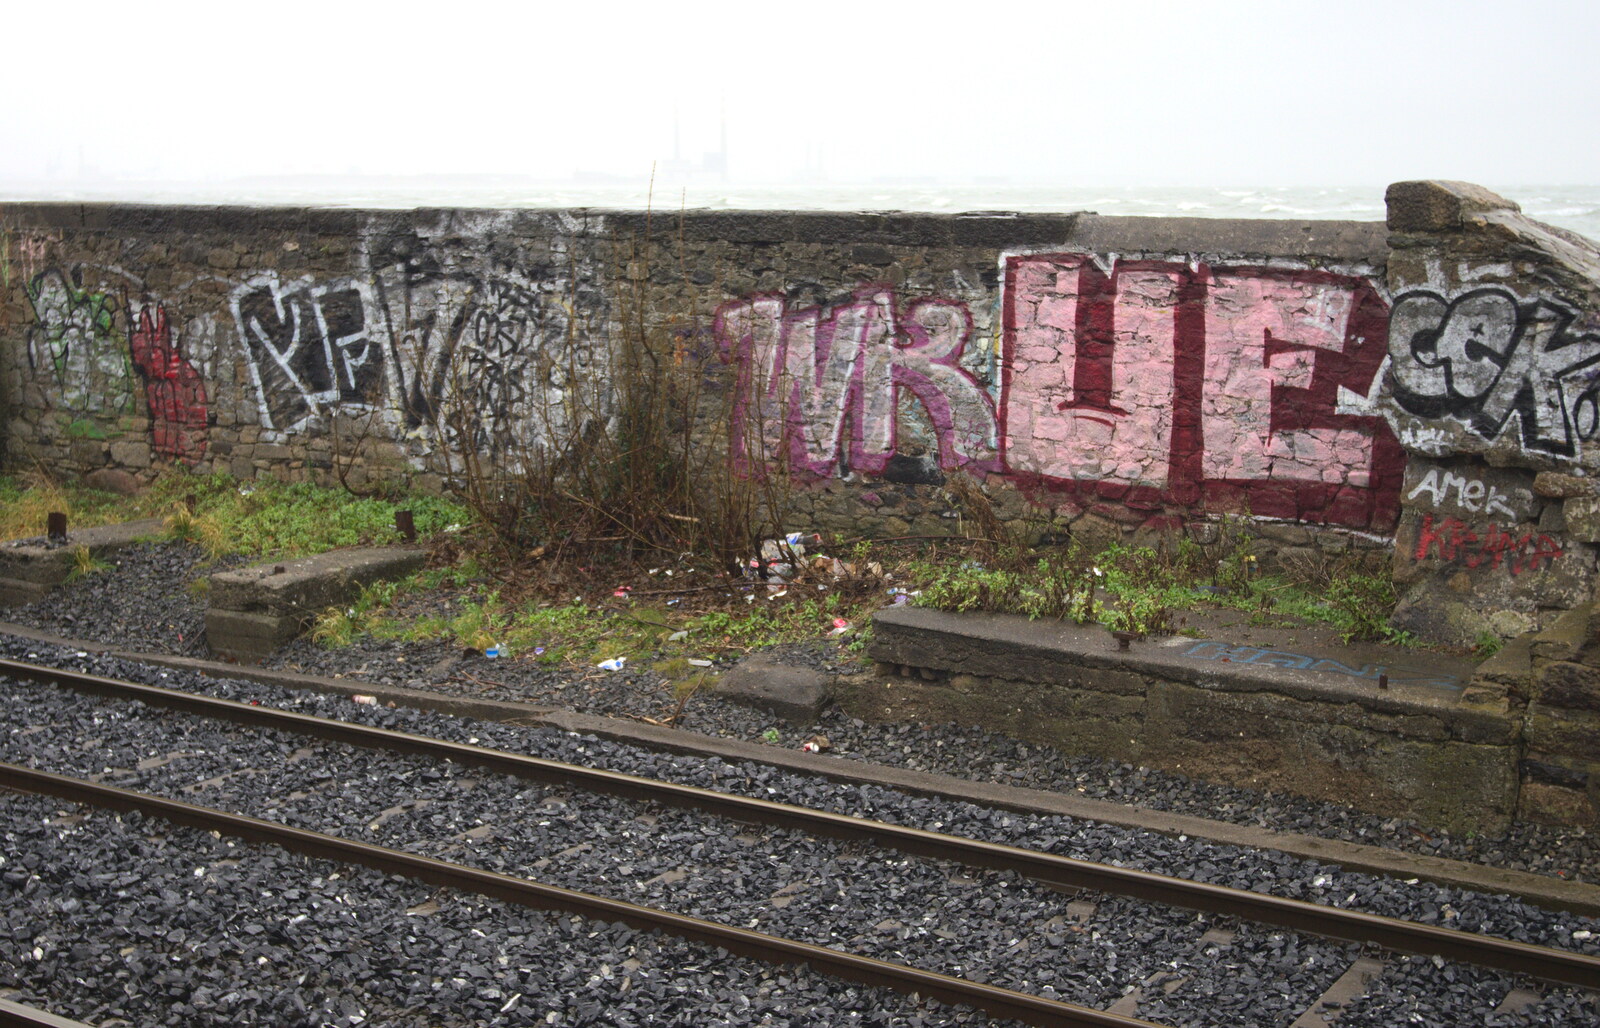 More graffiti on the sea wall from A Night on the Lash, Dublin, Ireland - 14th December 2012